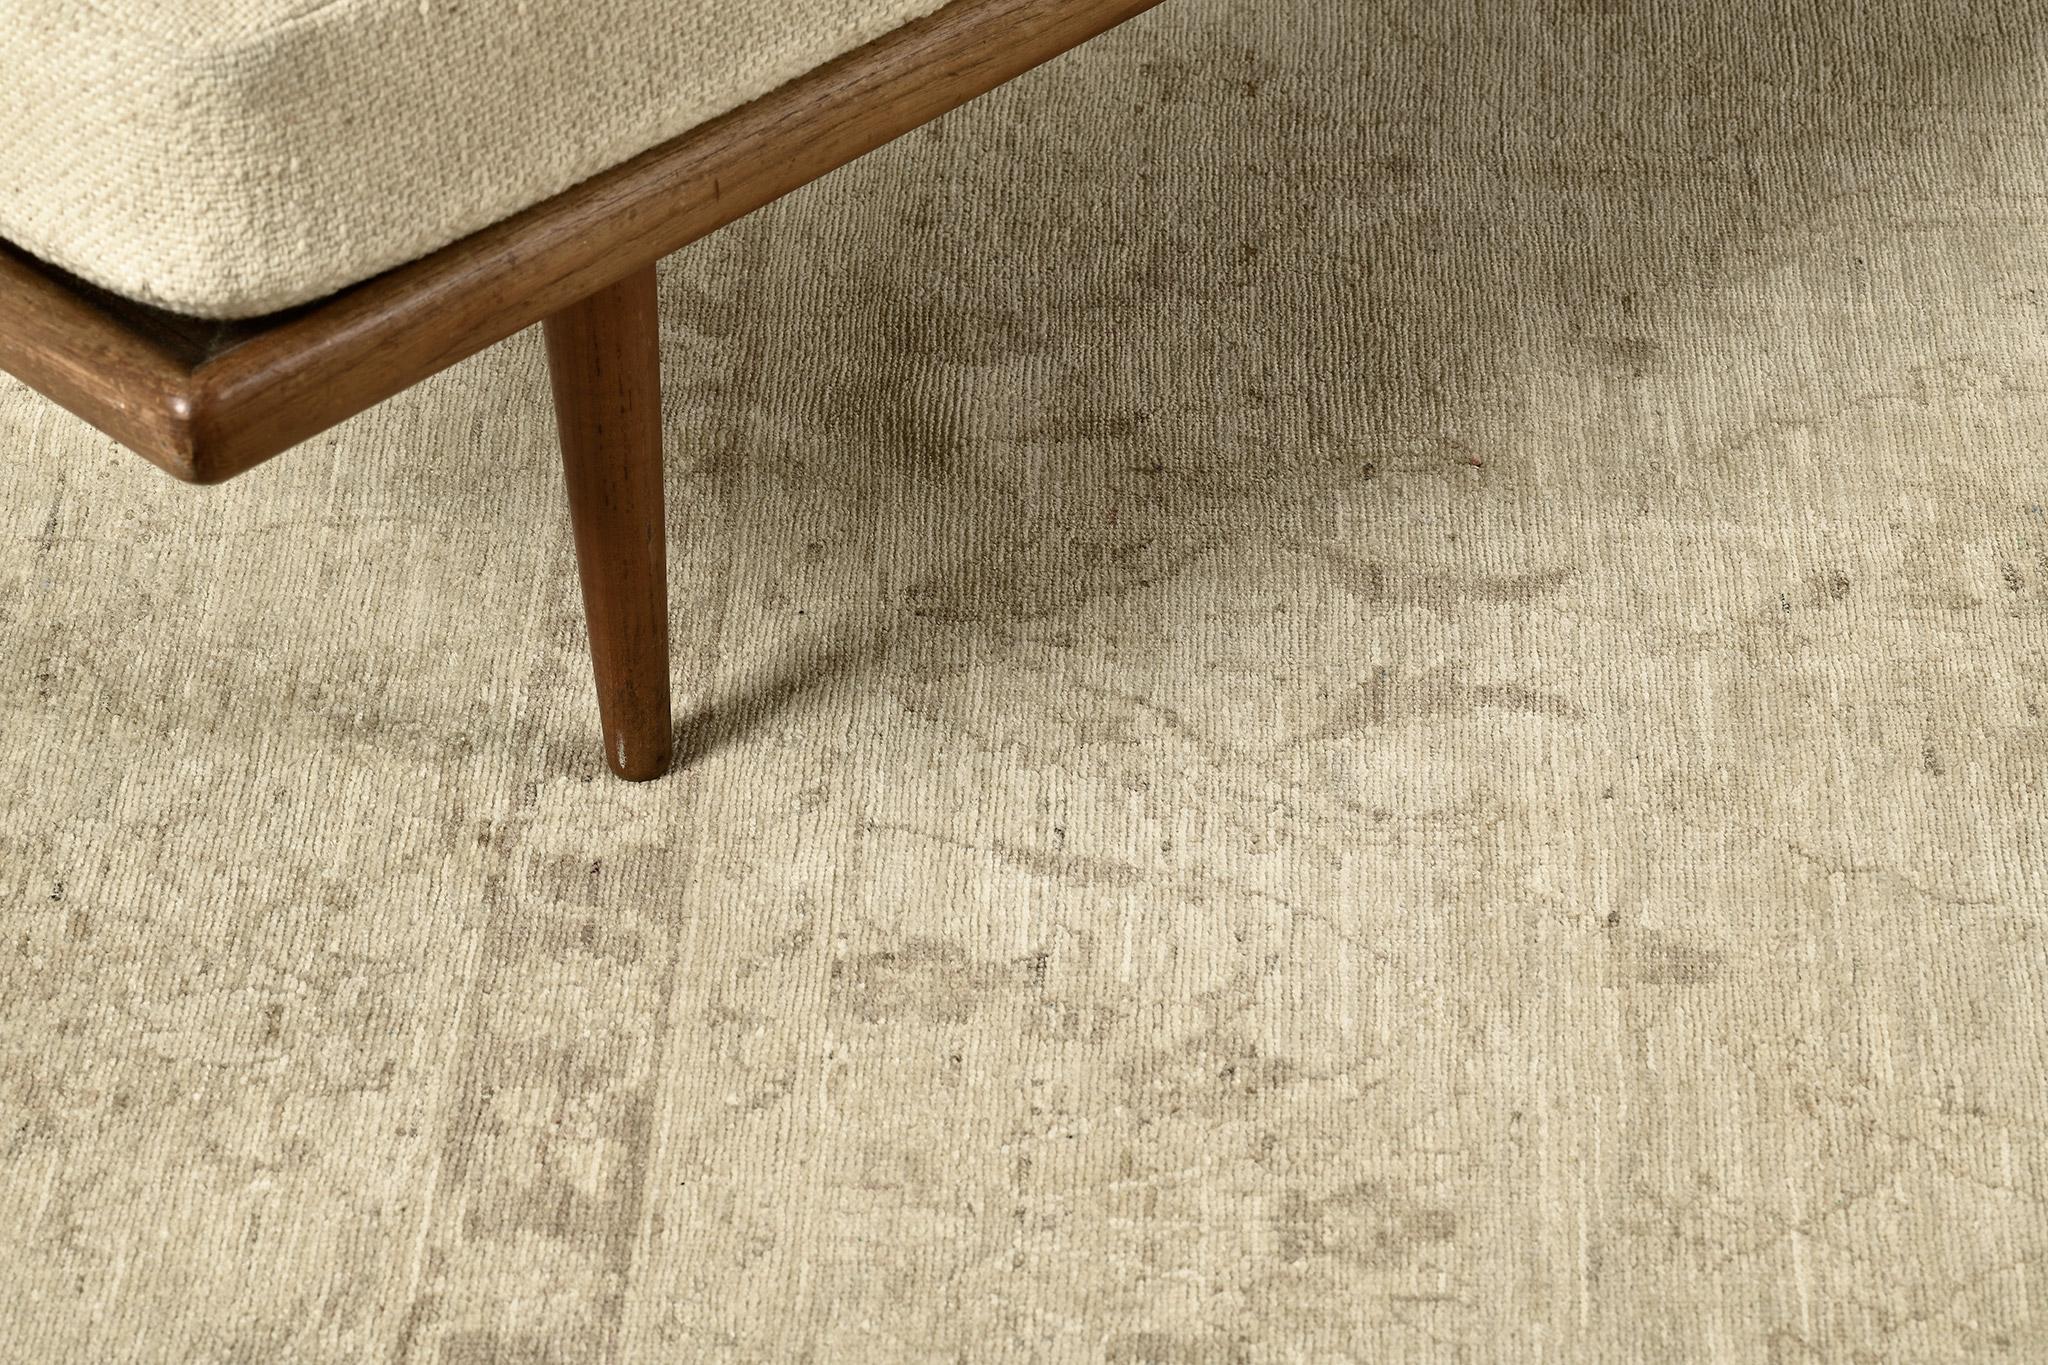 A stunning Oushak design revival rug that has a classic and timeless pattern. Featuring the collaboration of muted tones of sand and taupe, this sophisticated rug is composed with enchanting graceful palmettes and florid elements that create a